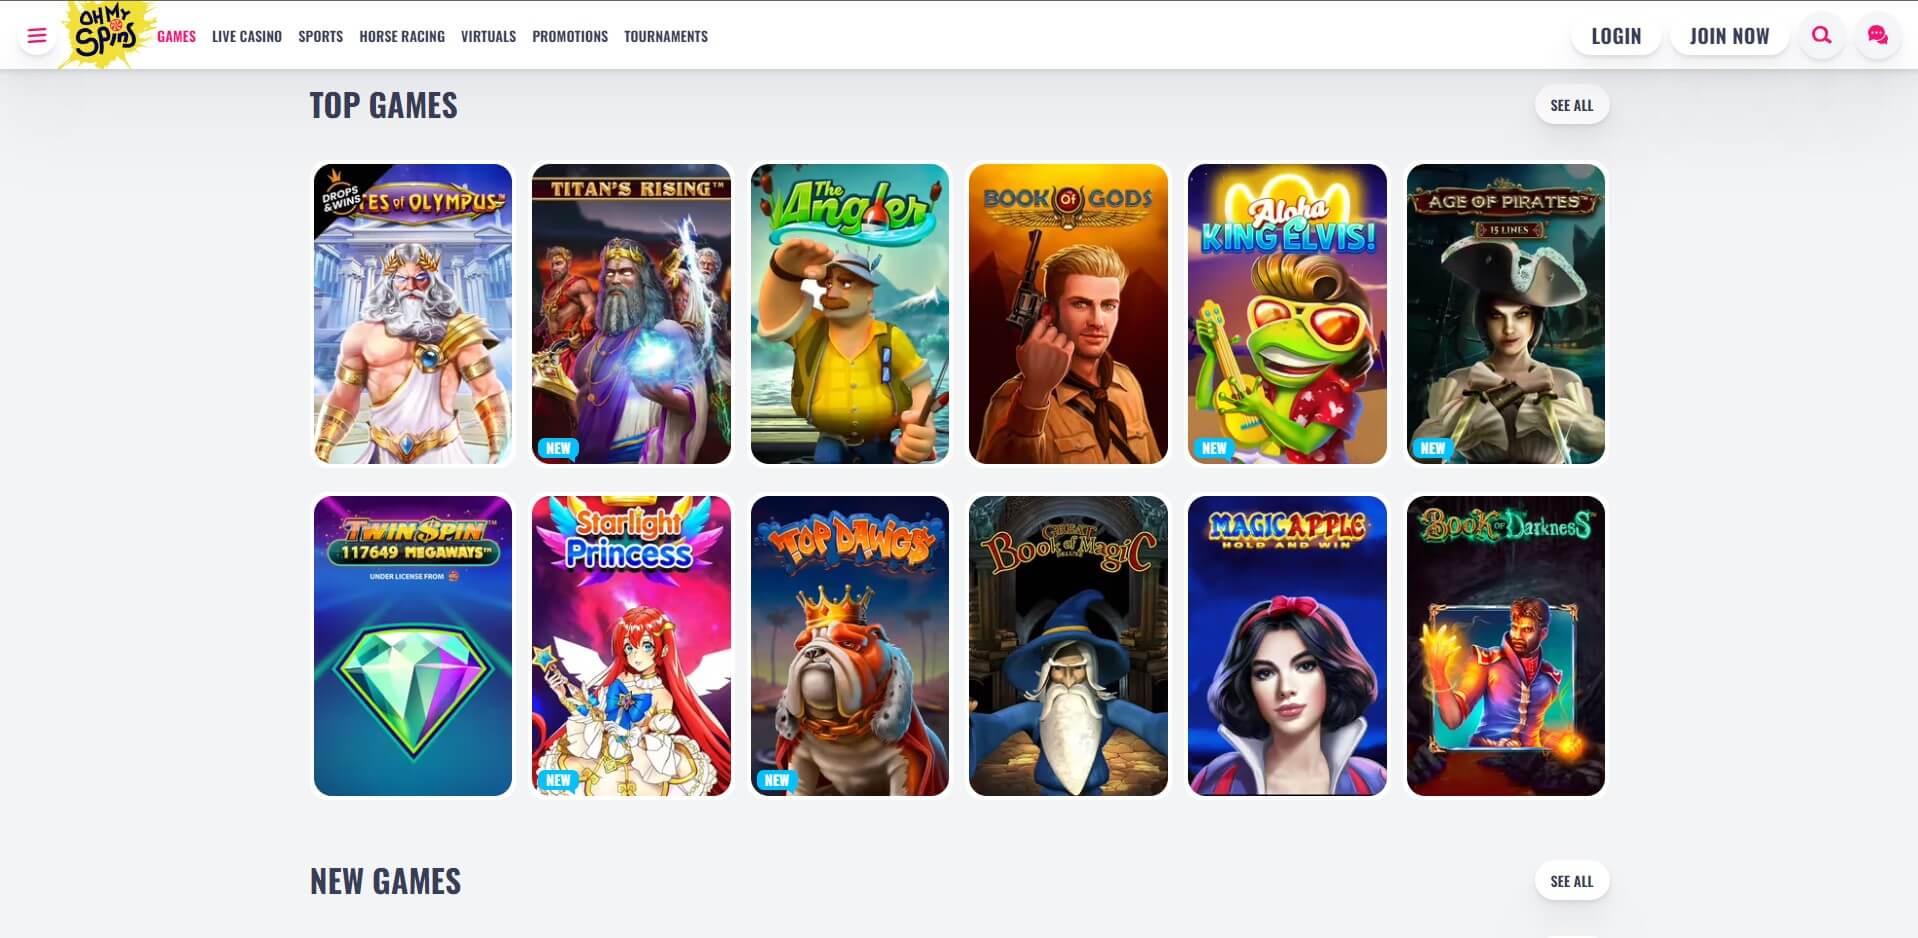 Games at Ohmyspins Casino